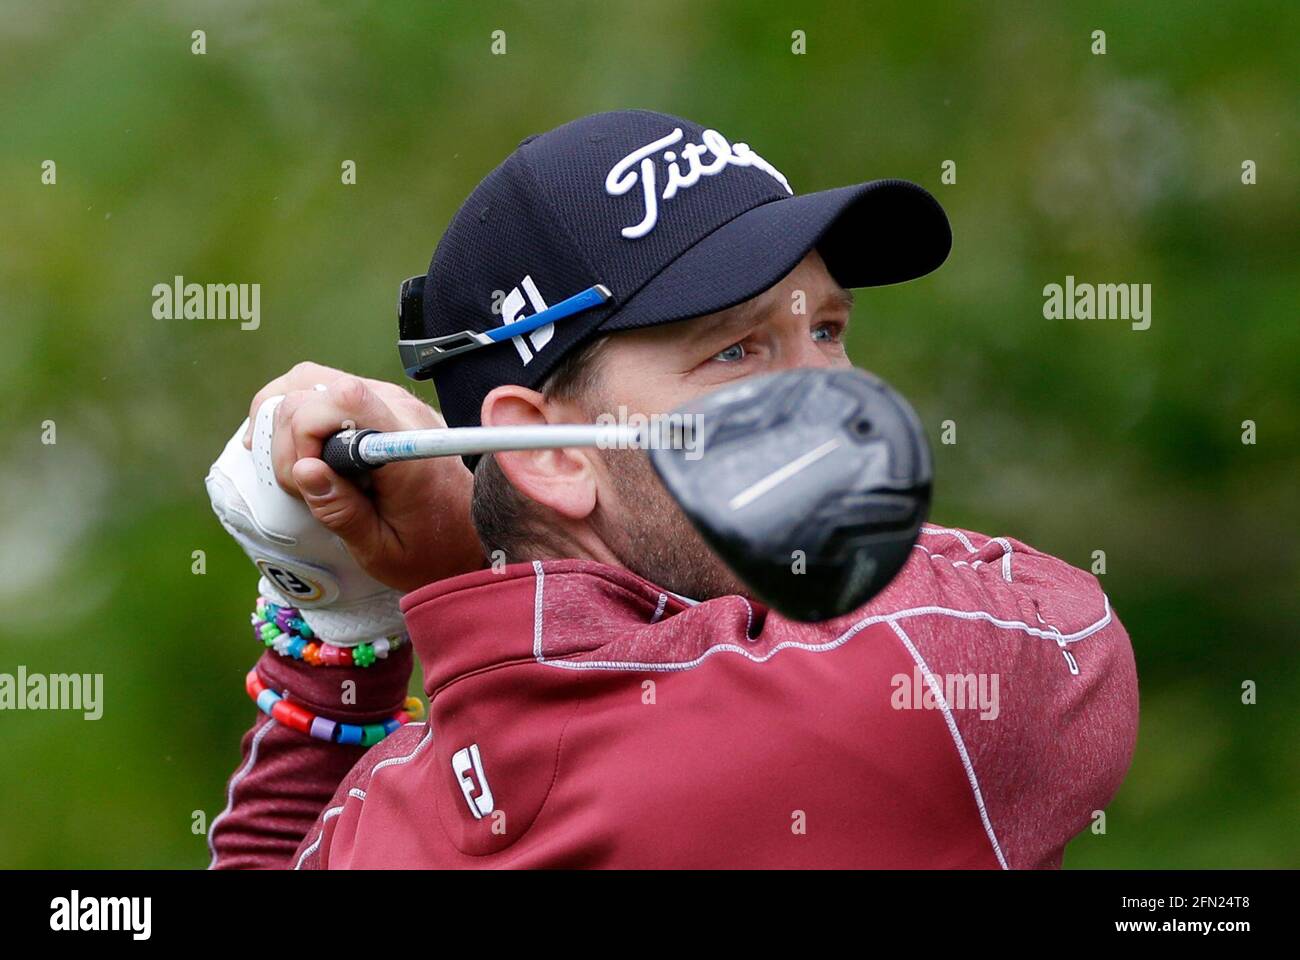 Golf European Tour British Masters The Belfry Sutton Coldfield Britain May 13 2021 Denmark S Joachim B Hansen In Action During The Second Round Action Images Via Reuters Paul Childs Stock Photo Alamy